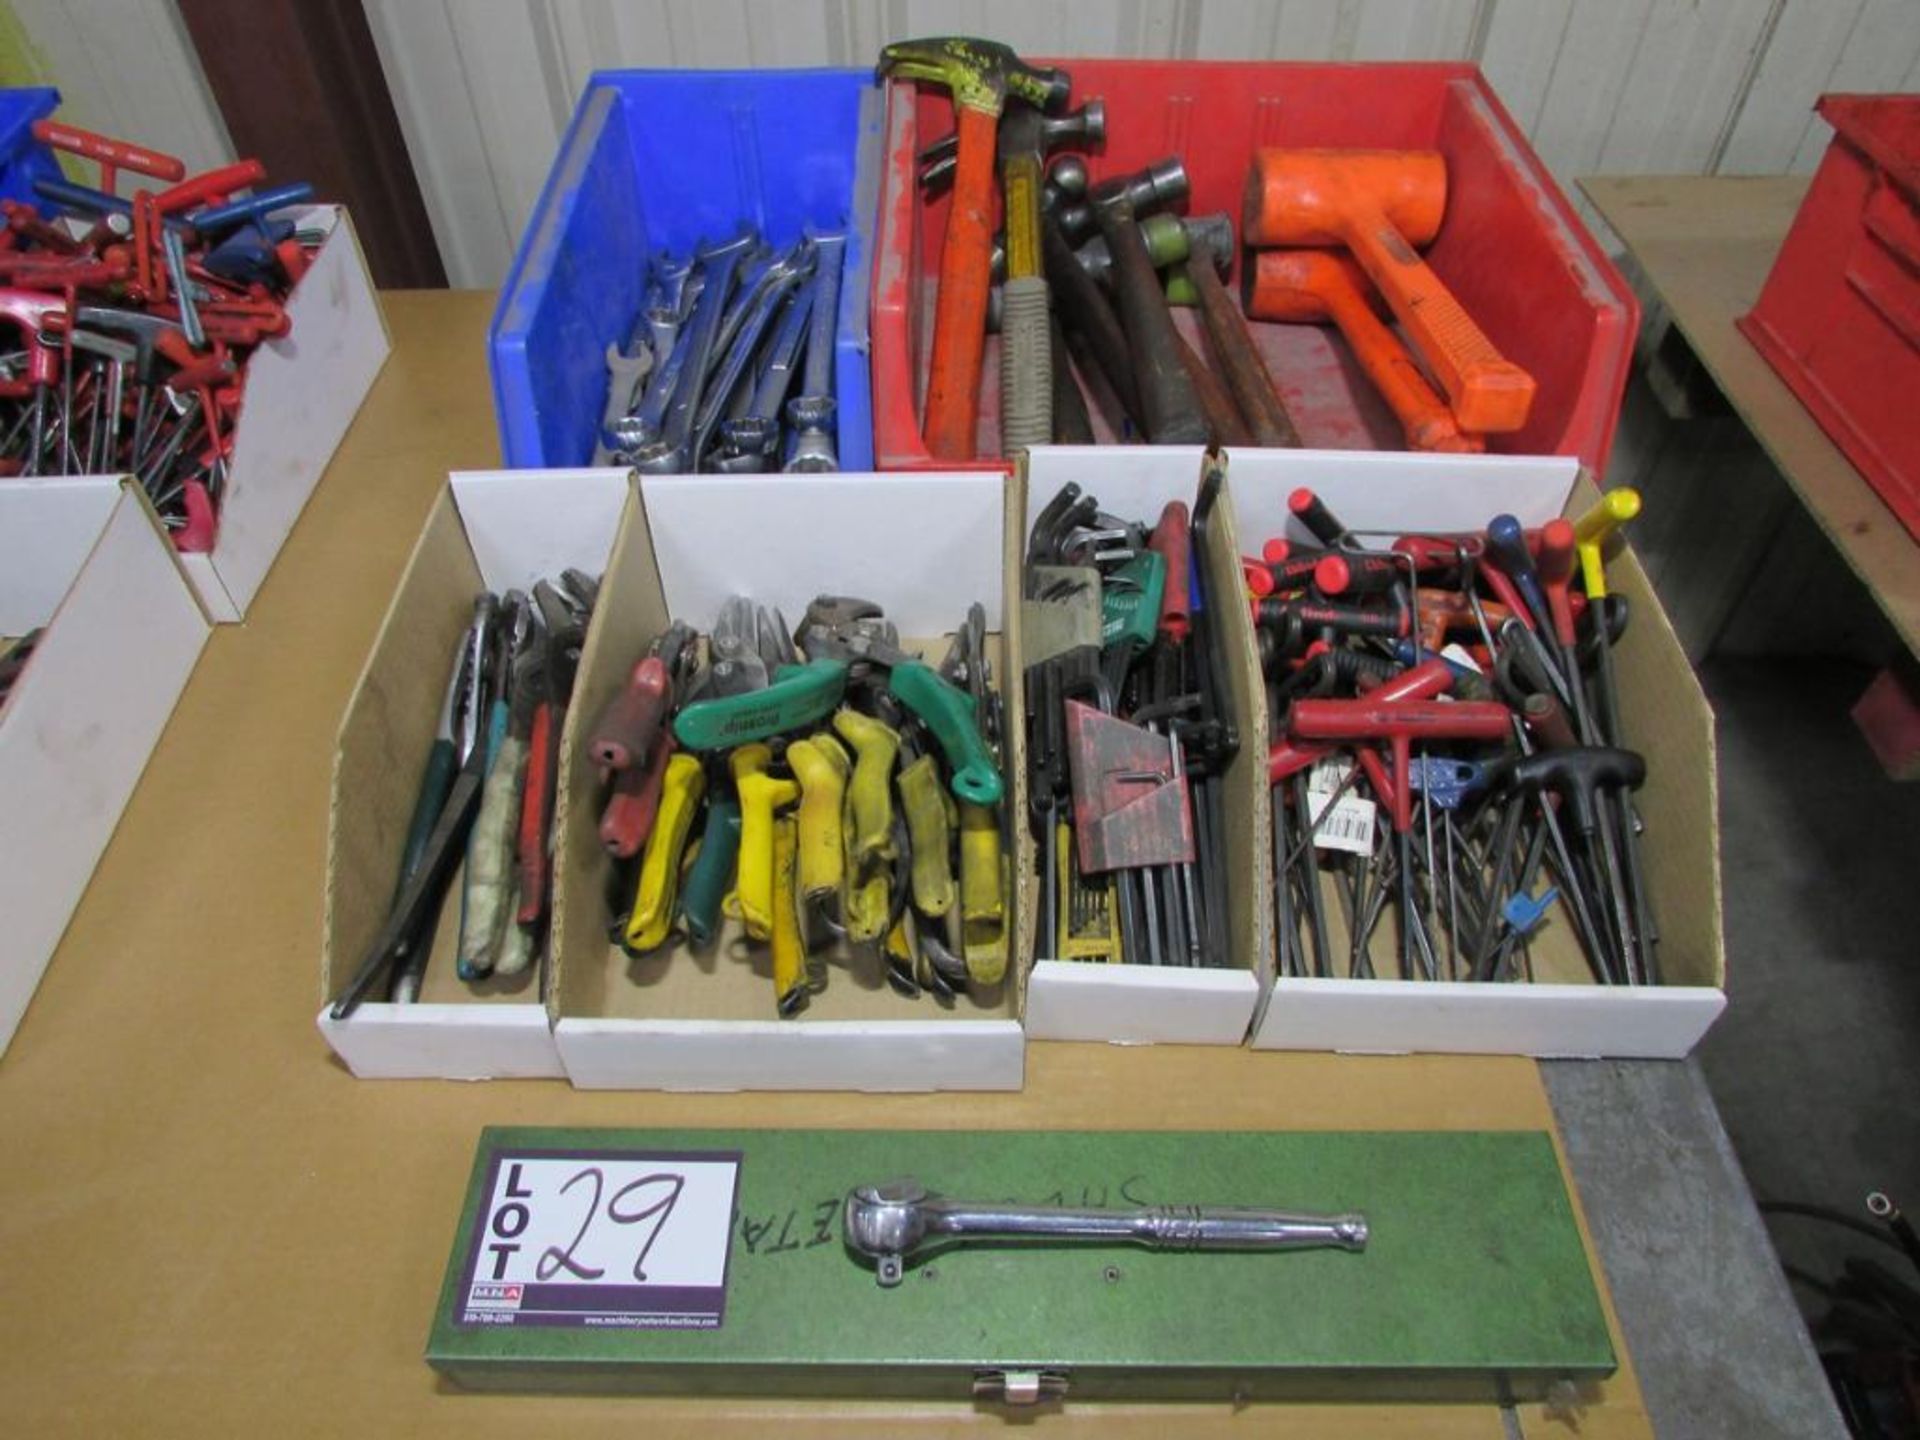 Assorted Hand Tools: Wrenches, Hammers, Pliers, Snips, Allen Wrenches, Ratchet, and Socket Set